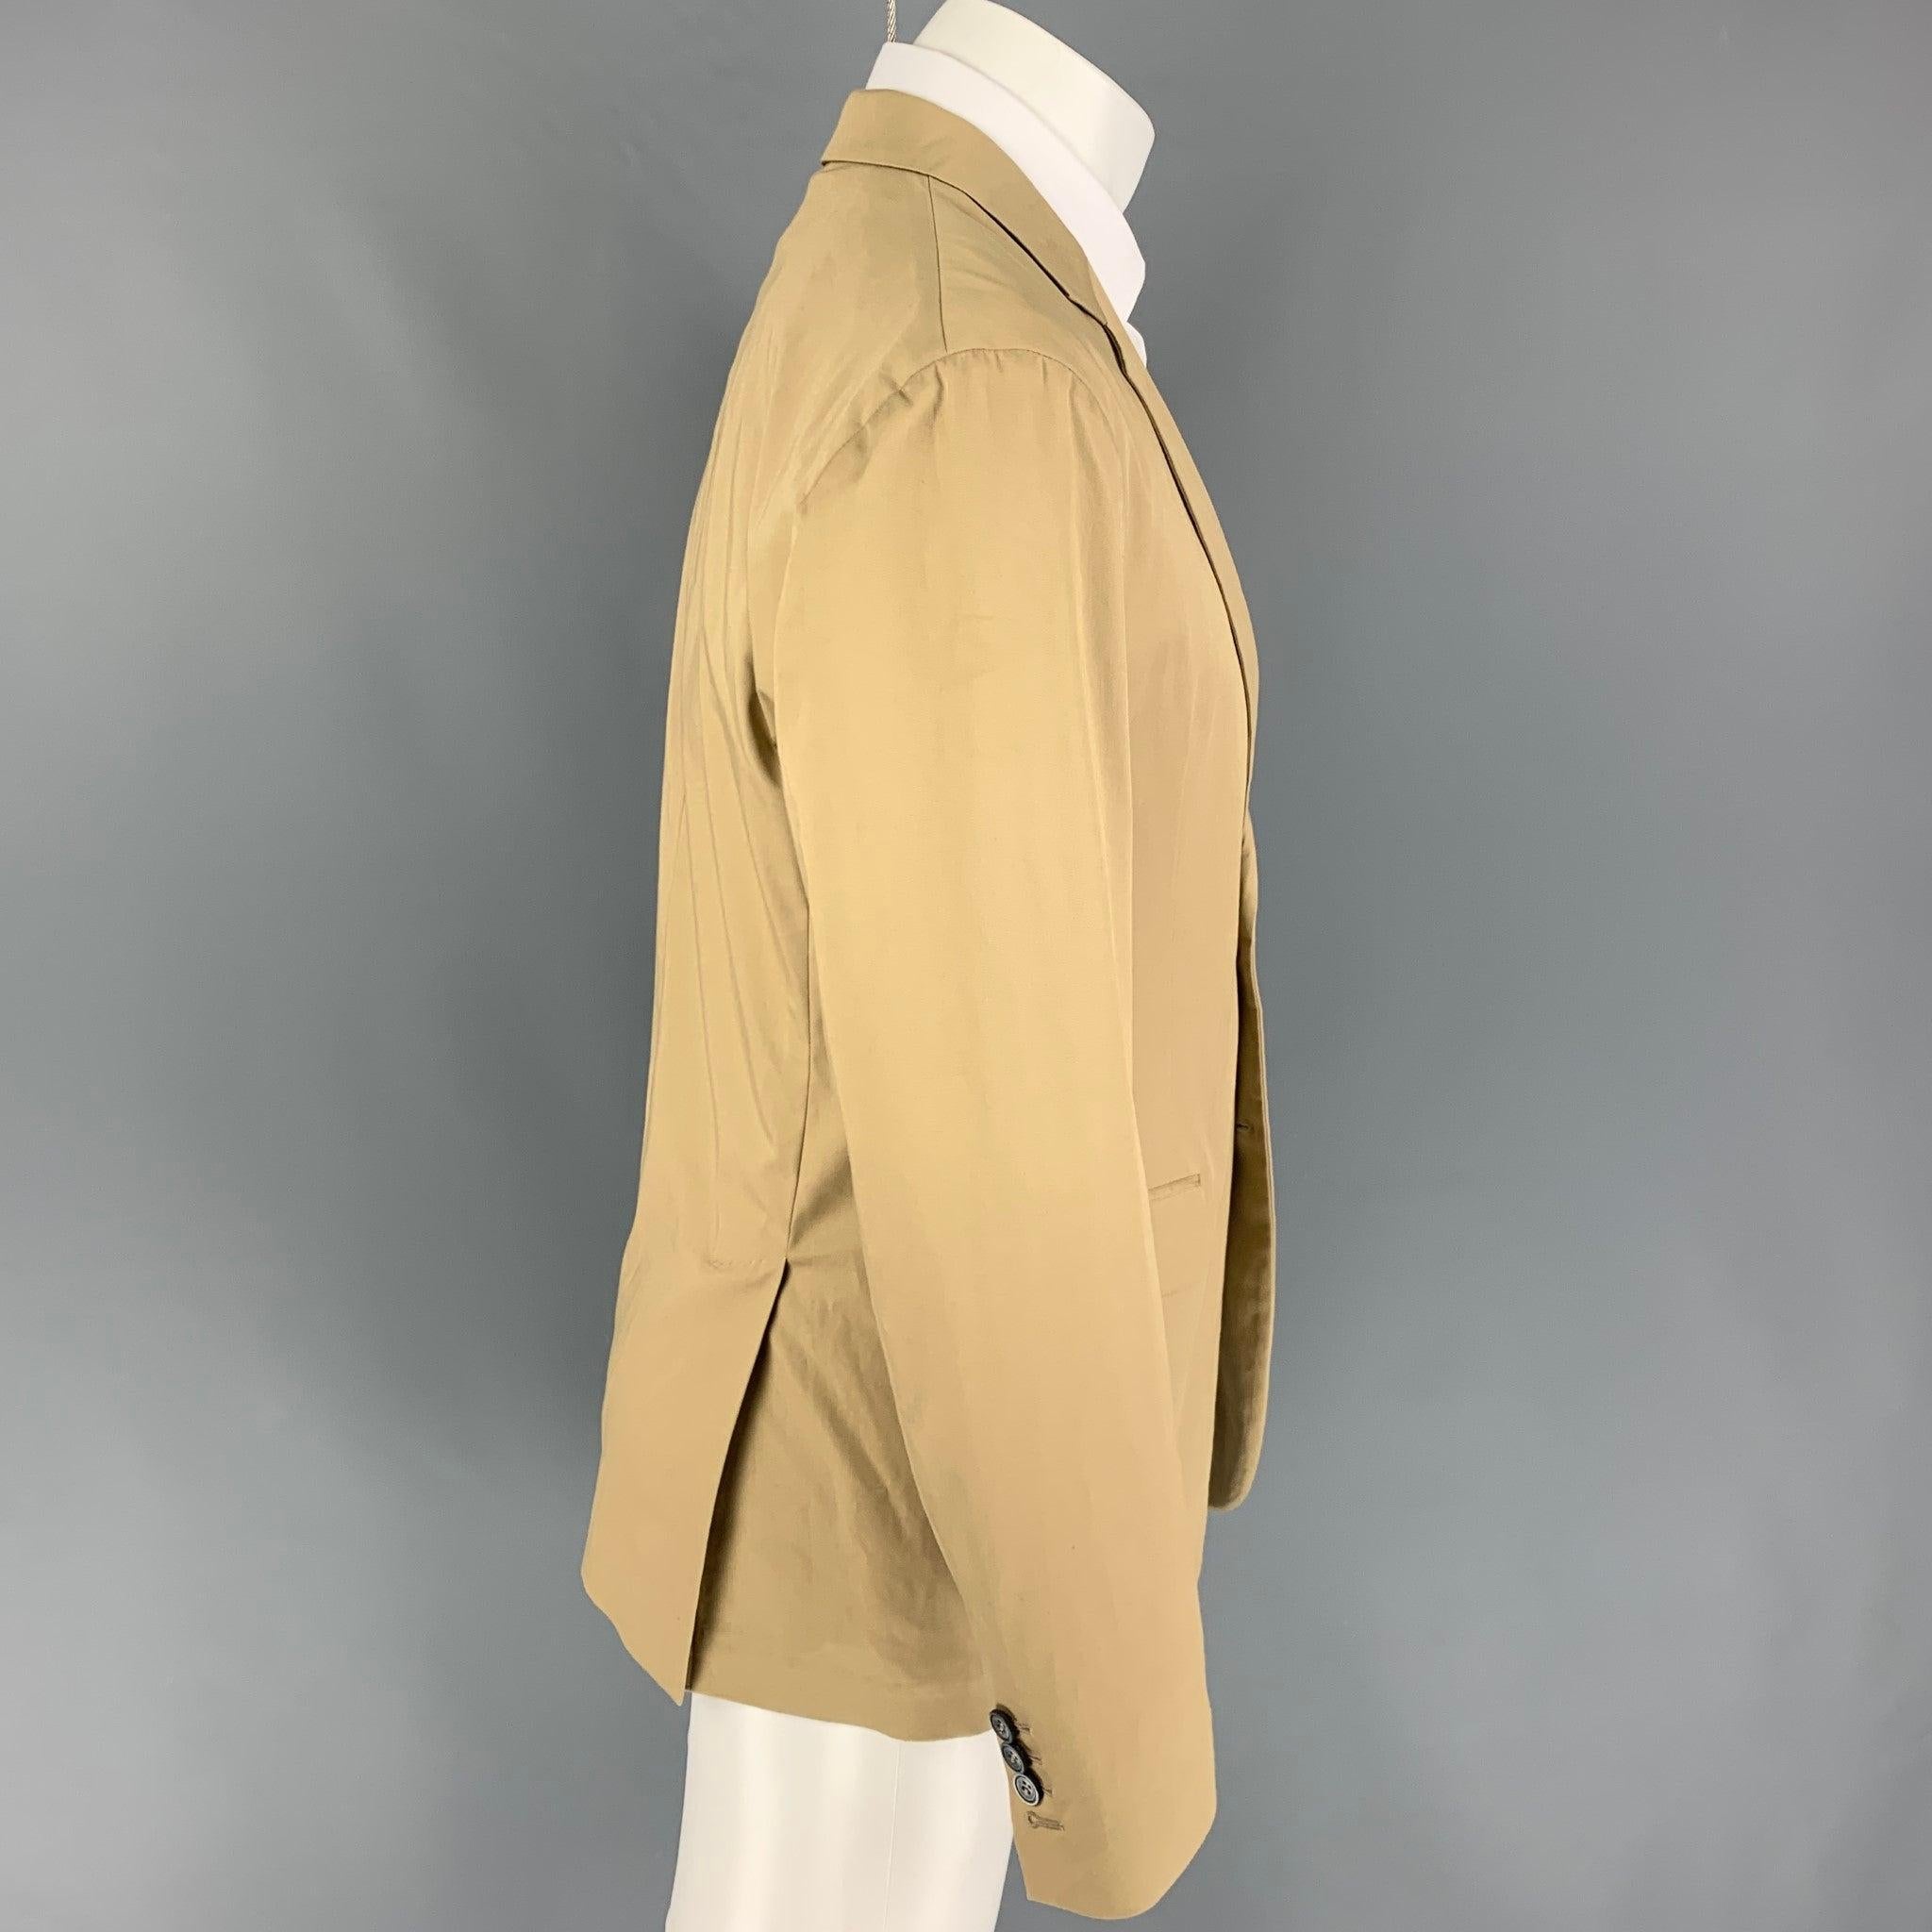 DSQUARED2 sport coat comes in a khaki cotton featuring a notch lapel, flap pockets, double back vent, and a double button closure. Made in Italy.
Very Good
Pre-Owned Condition. 

Marked:   48 

Measurements: 
 
Shoulder: 18.5 inches  Chest: 38